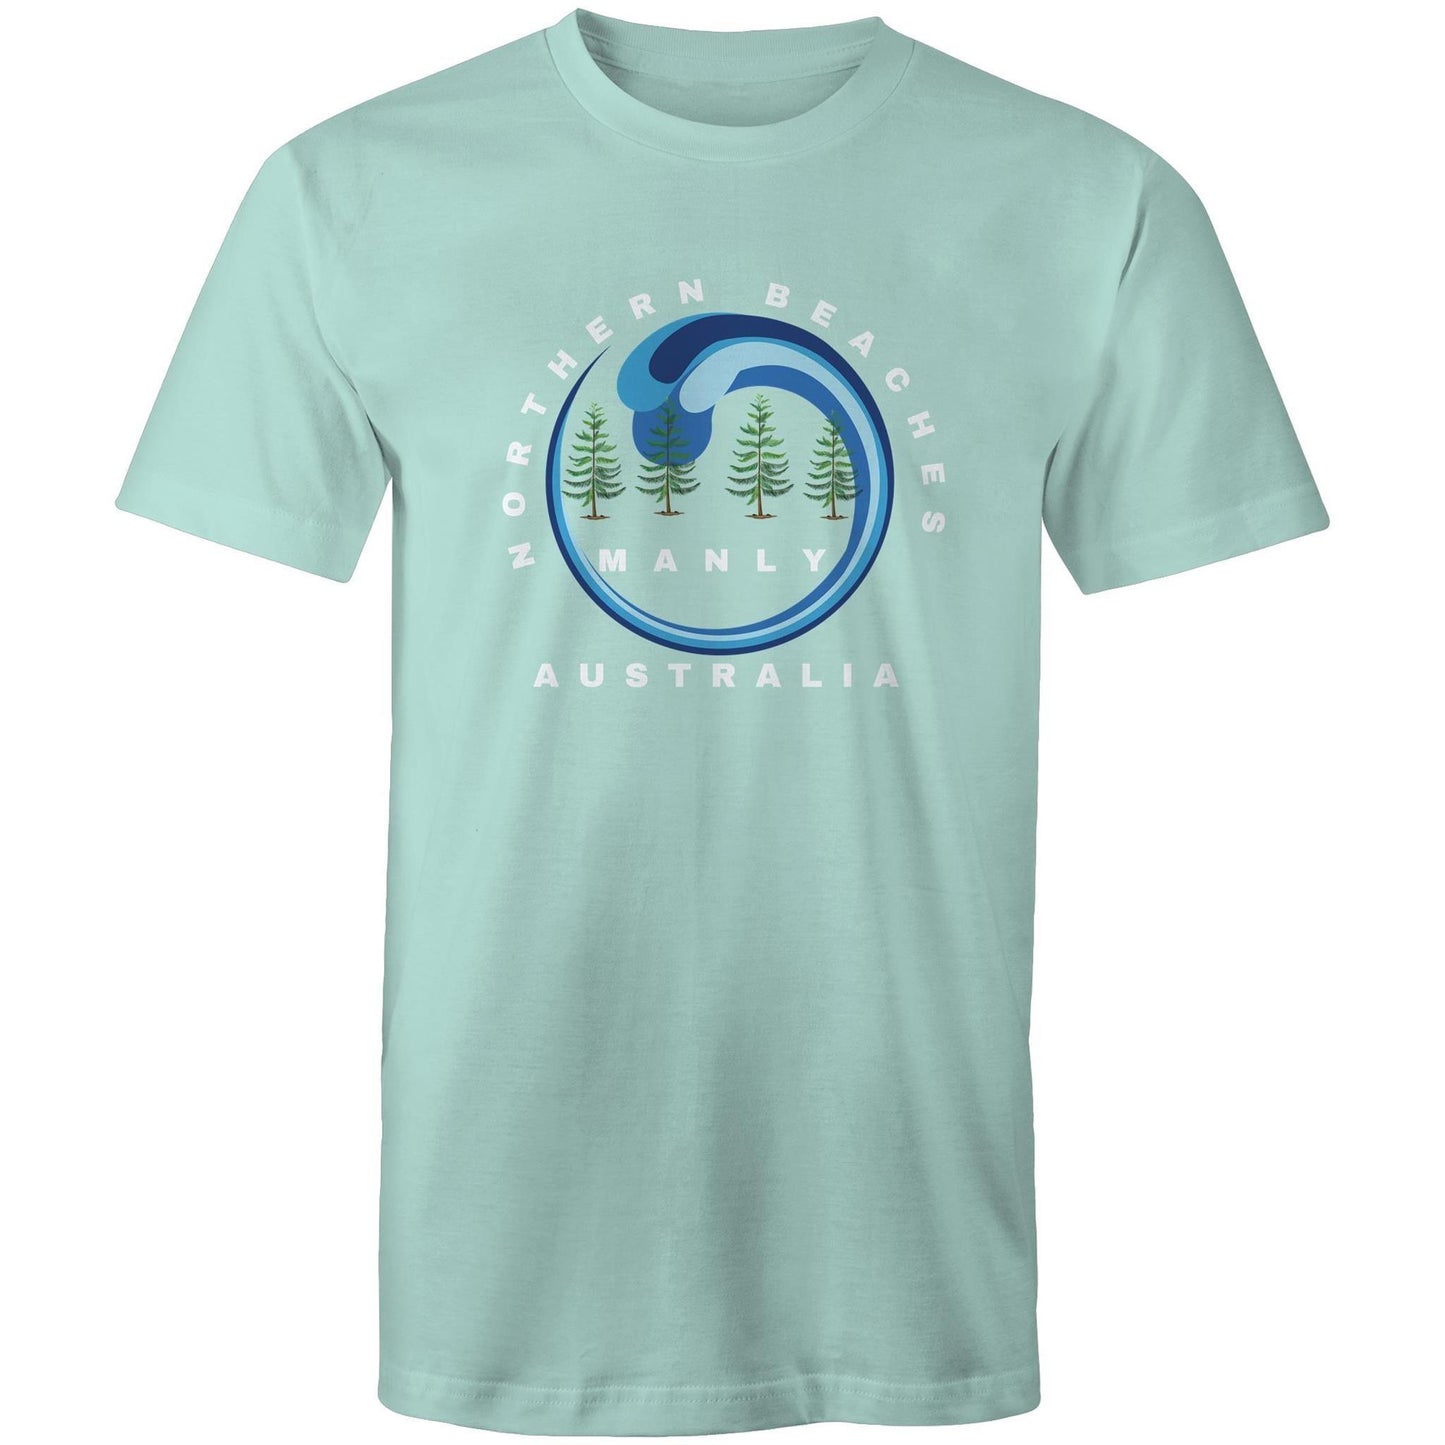 Mens soft cotton T-Shirt Northern Beaches logo in sizes up to 5XL - Lost Manly Shop